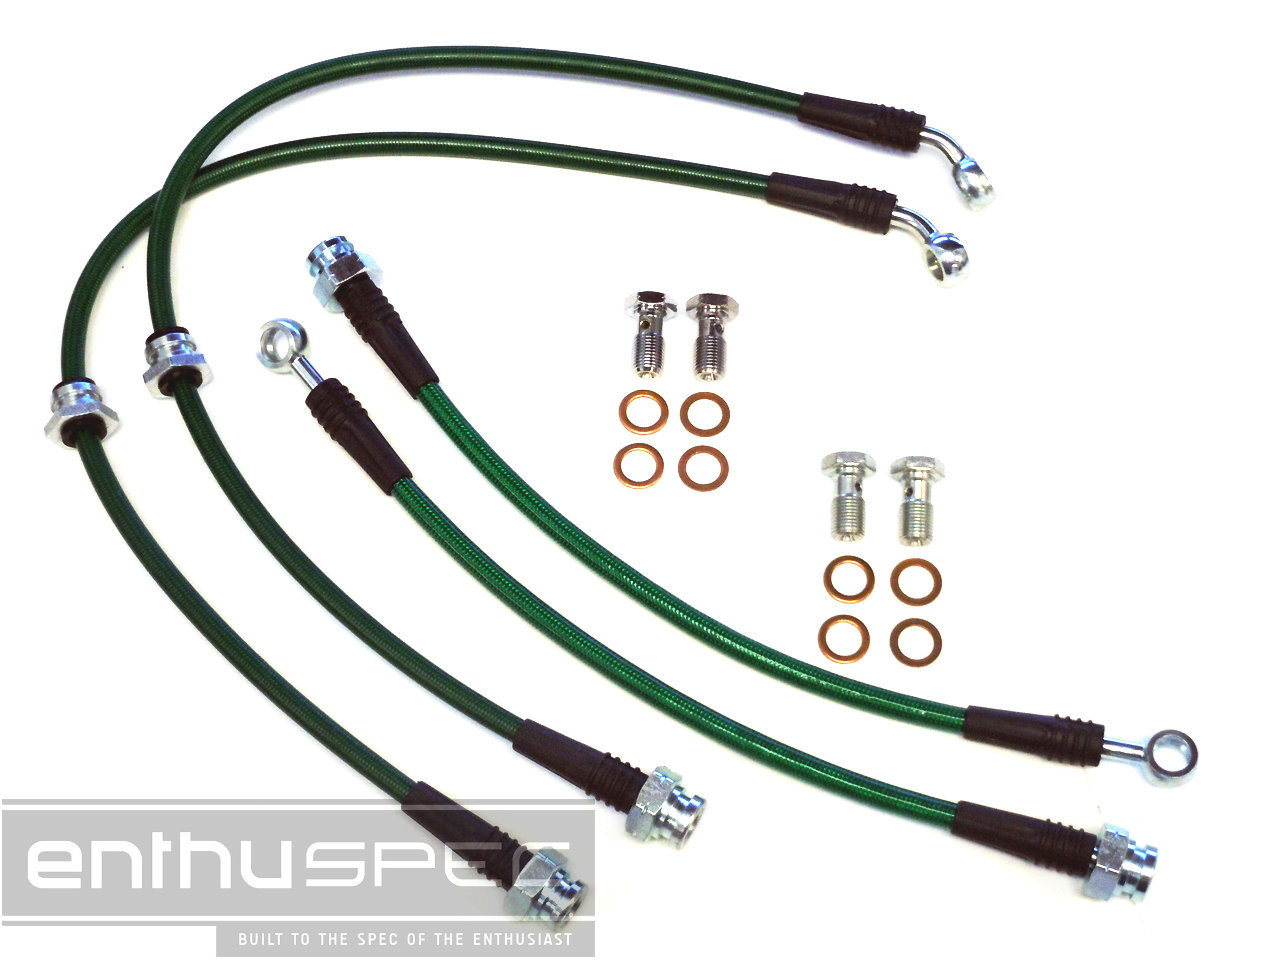 ISR Stainless Steel Braided FRONT Brake Lines Pair Kit for 240SX S13 S14 ISIS